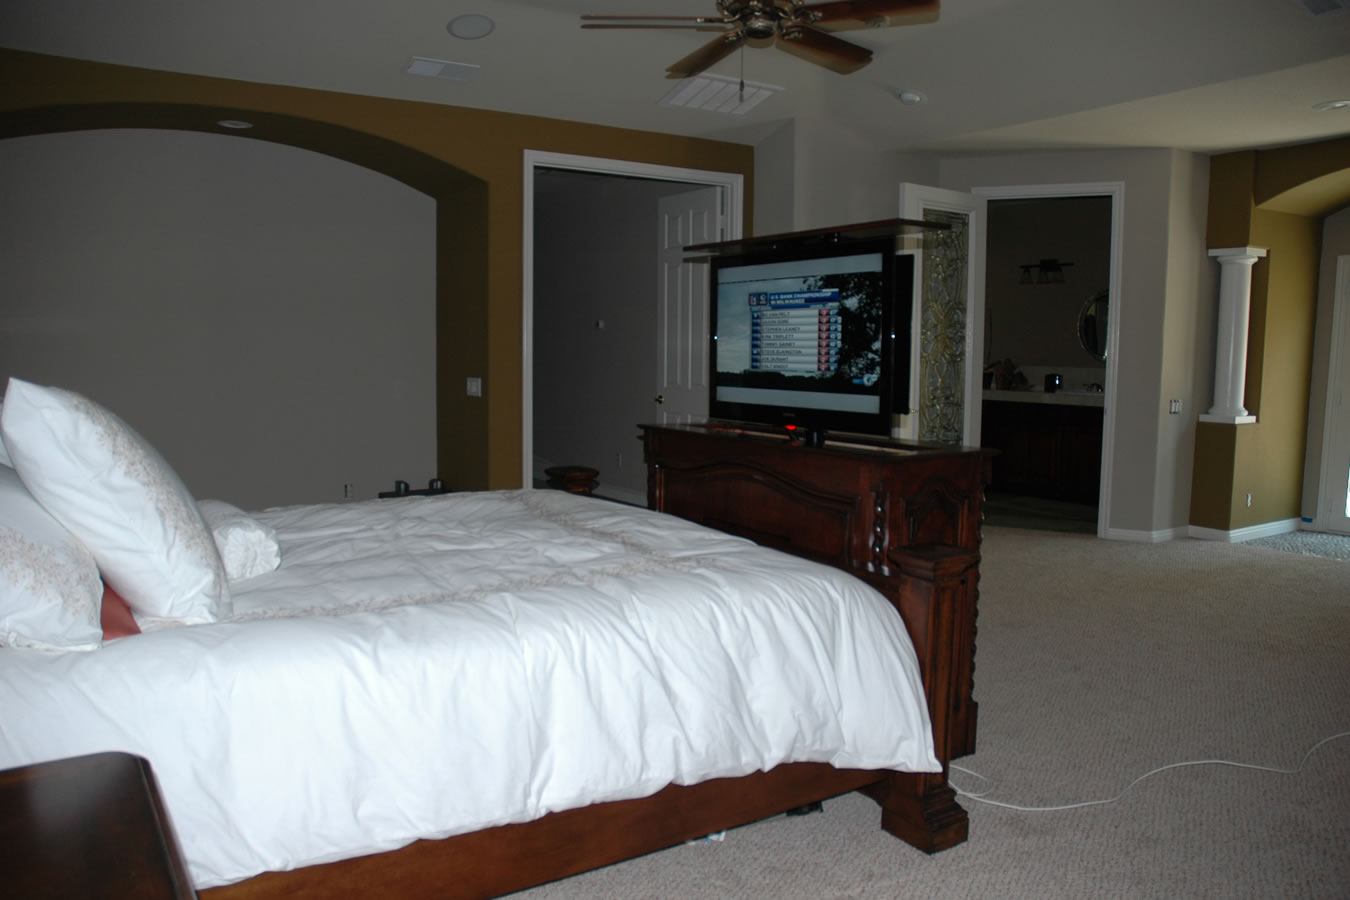 End Of Bed Tv Lift Cabinet Coronado At The Foot Of The Bed